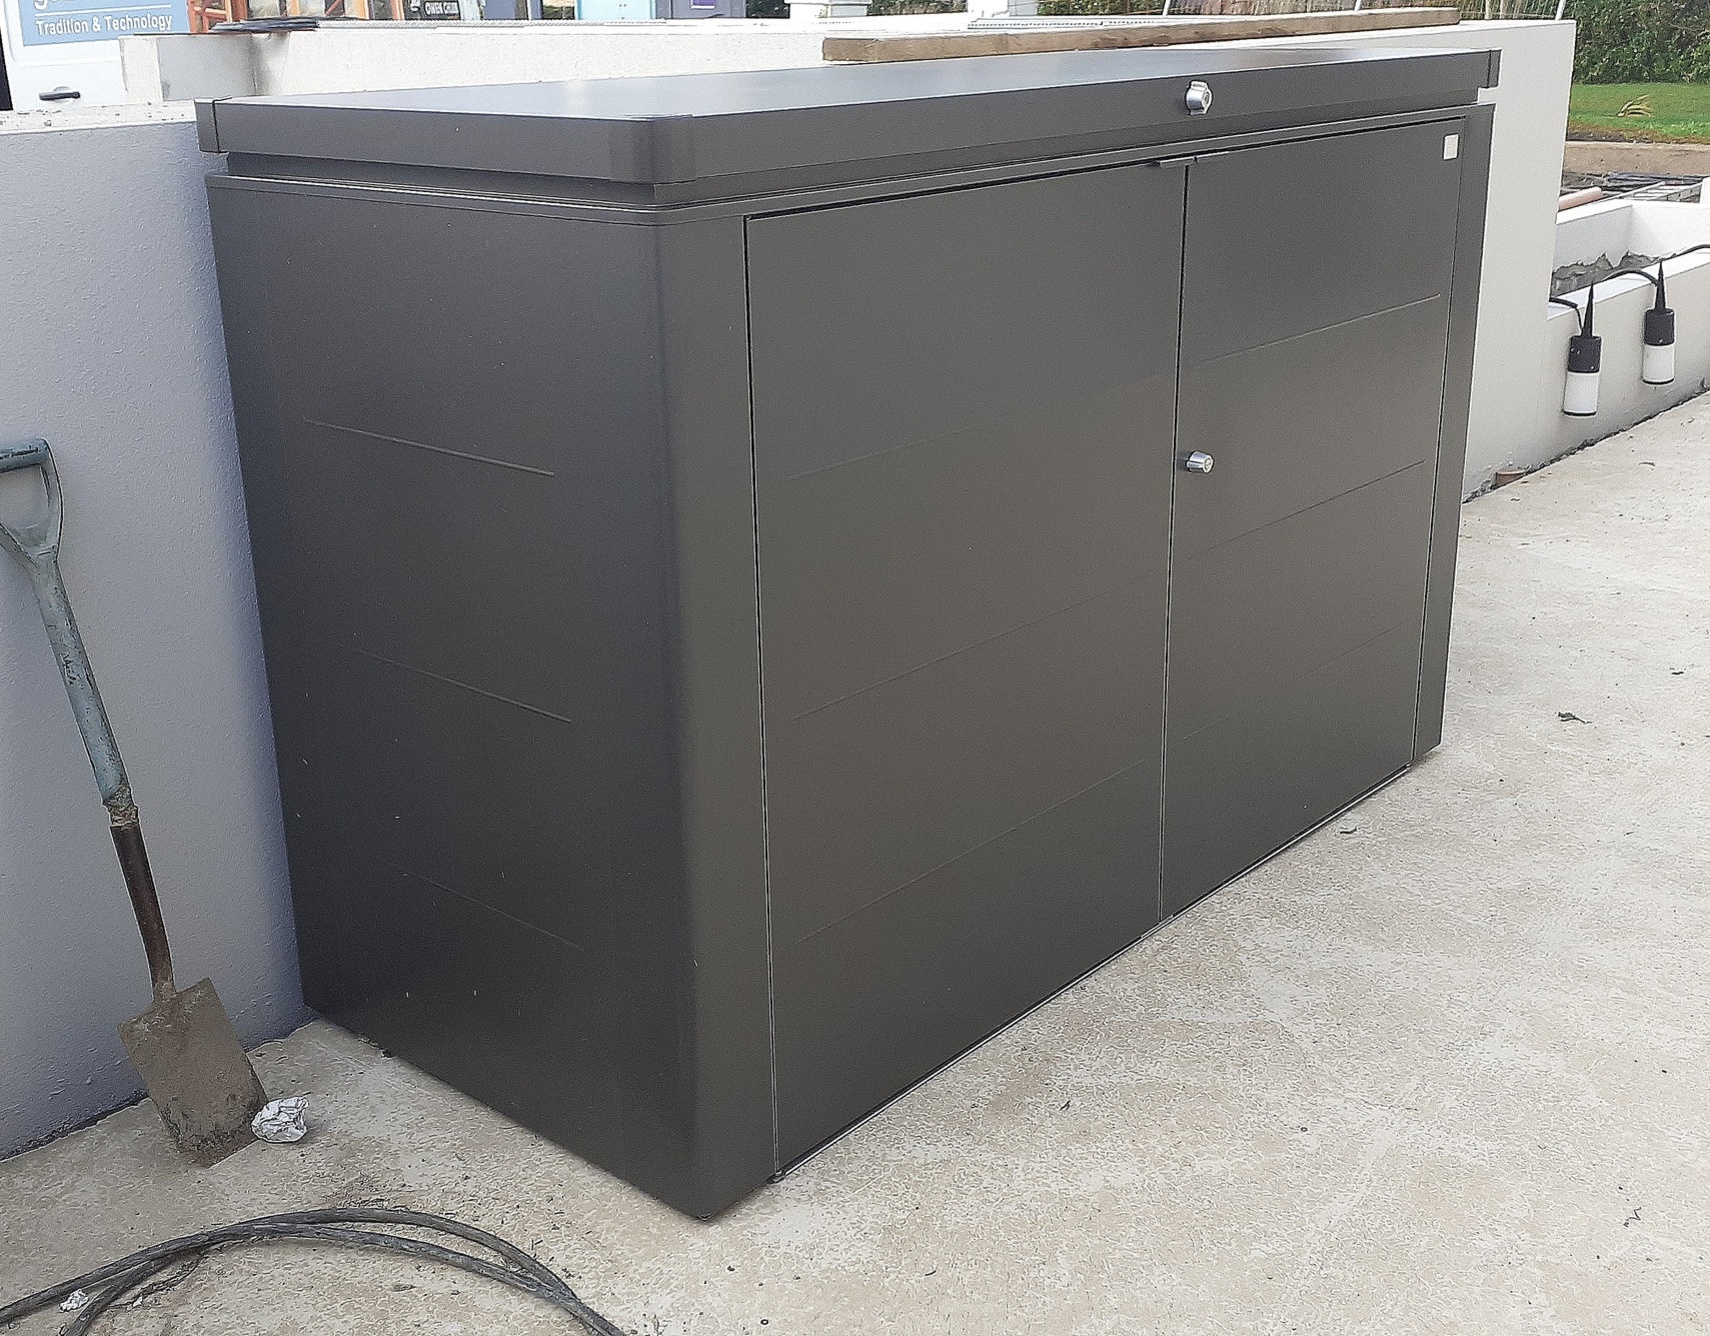 Biohort HighBoard 200 Wheelie Bin Storage Unit - exceptional quality, blending functionality, durability and sleek design to create stylish, secure & weatherproof storage solution for waste bins etc  |  Supplied + Fitted in Rosslare, Co Wexford by Owen Chubb Landscapers - Ireland's premier Biohort Supplier & Installer.